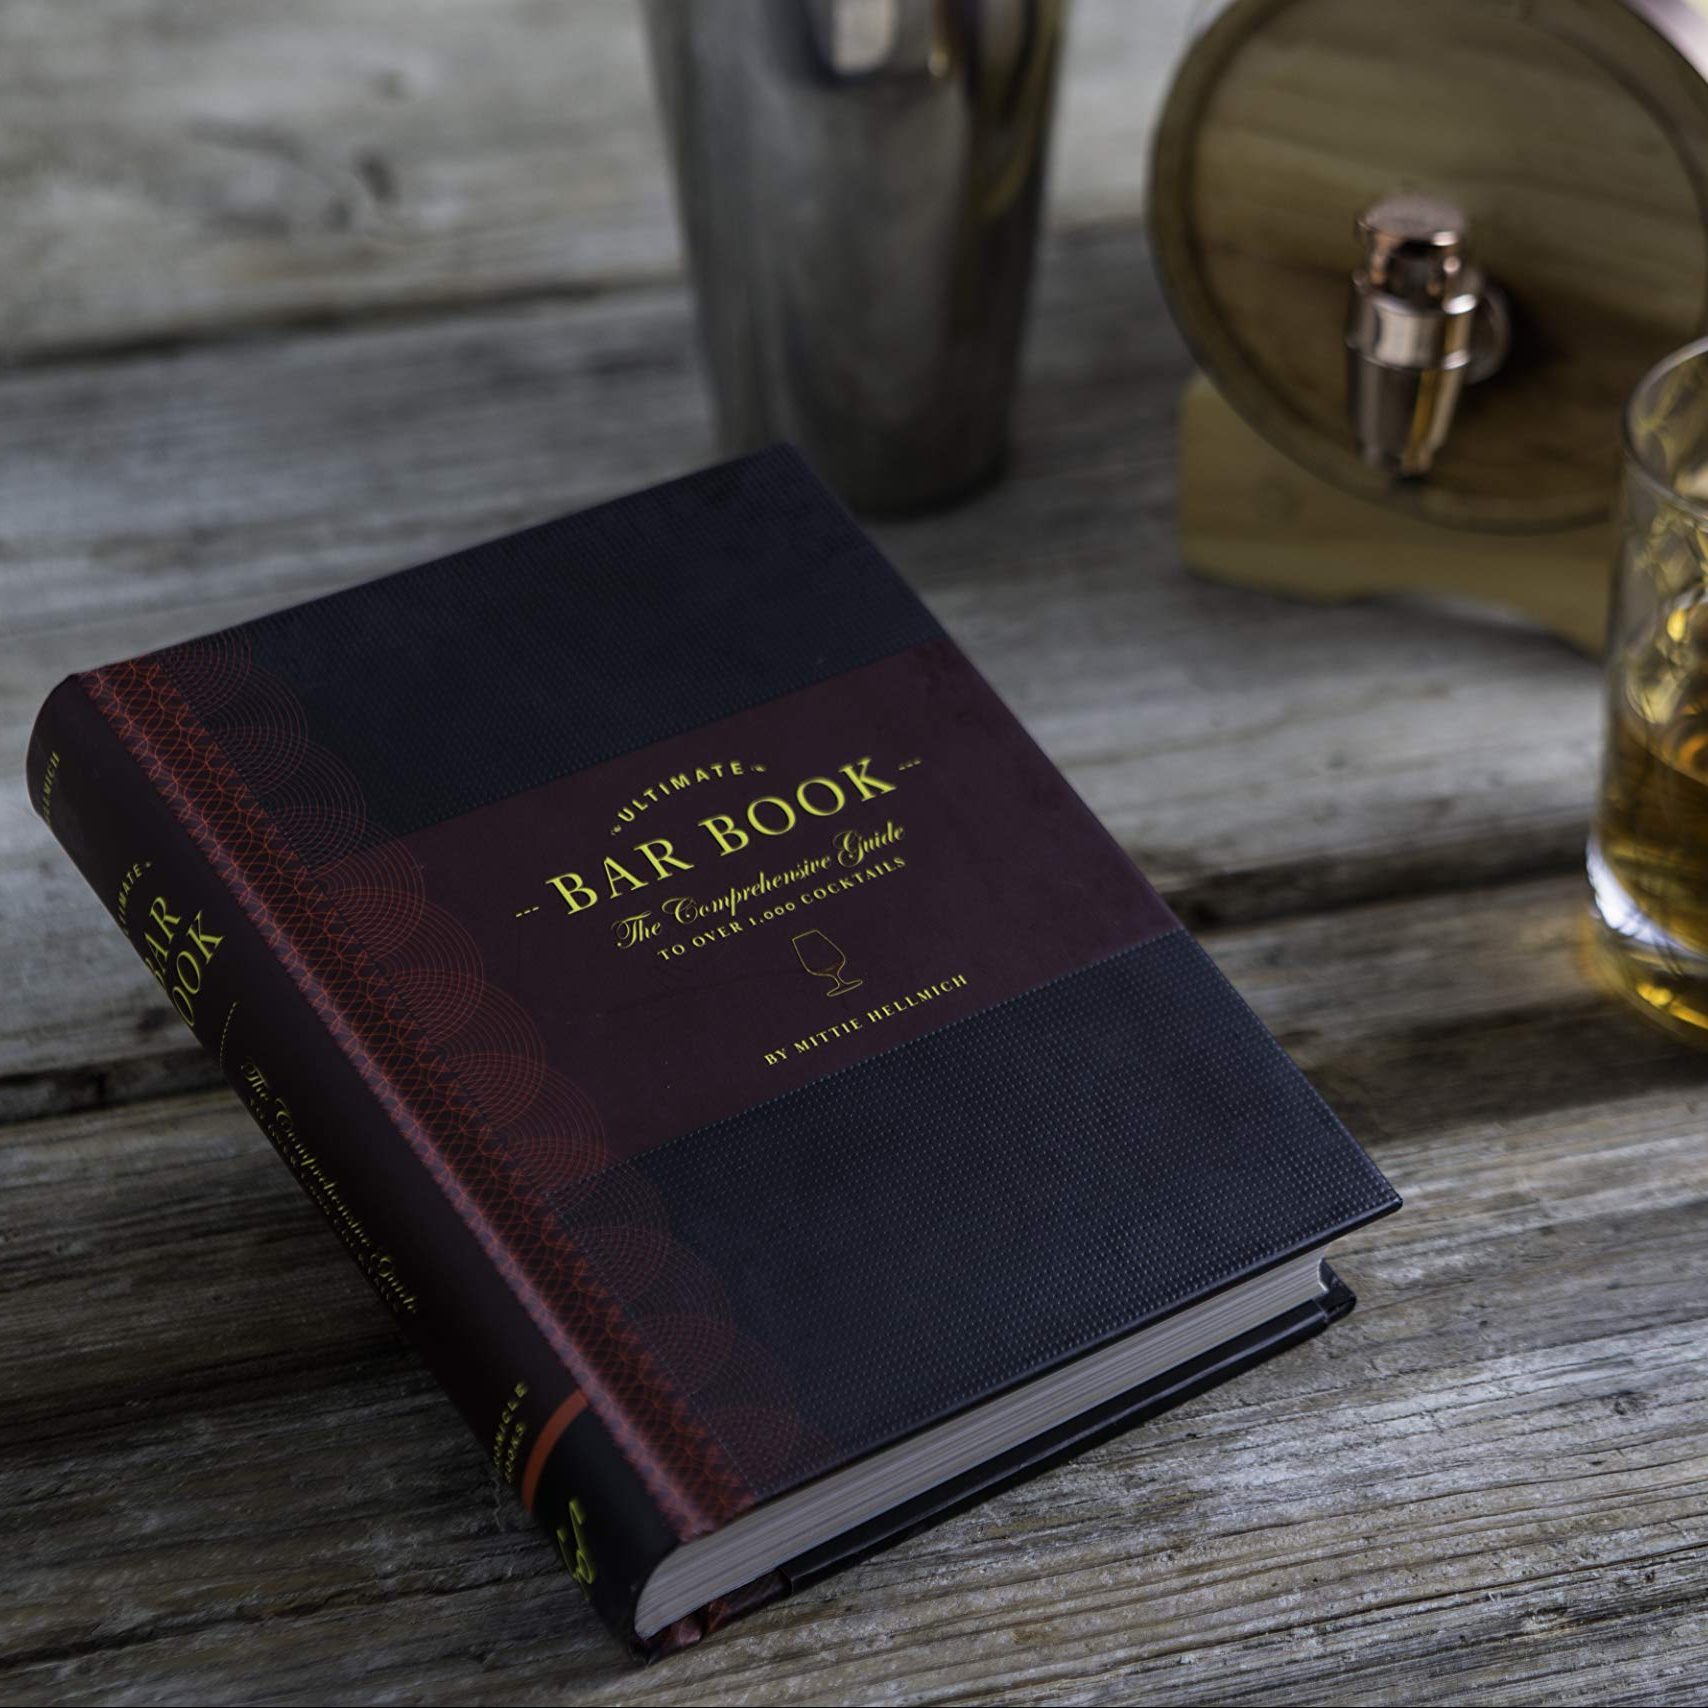 27 Amazing Gifts For Bartenders They'll Have To Raise A Glass To